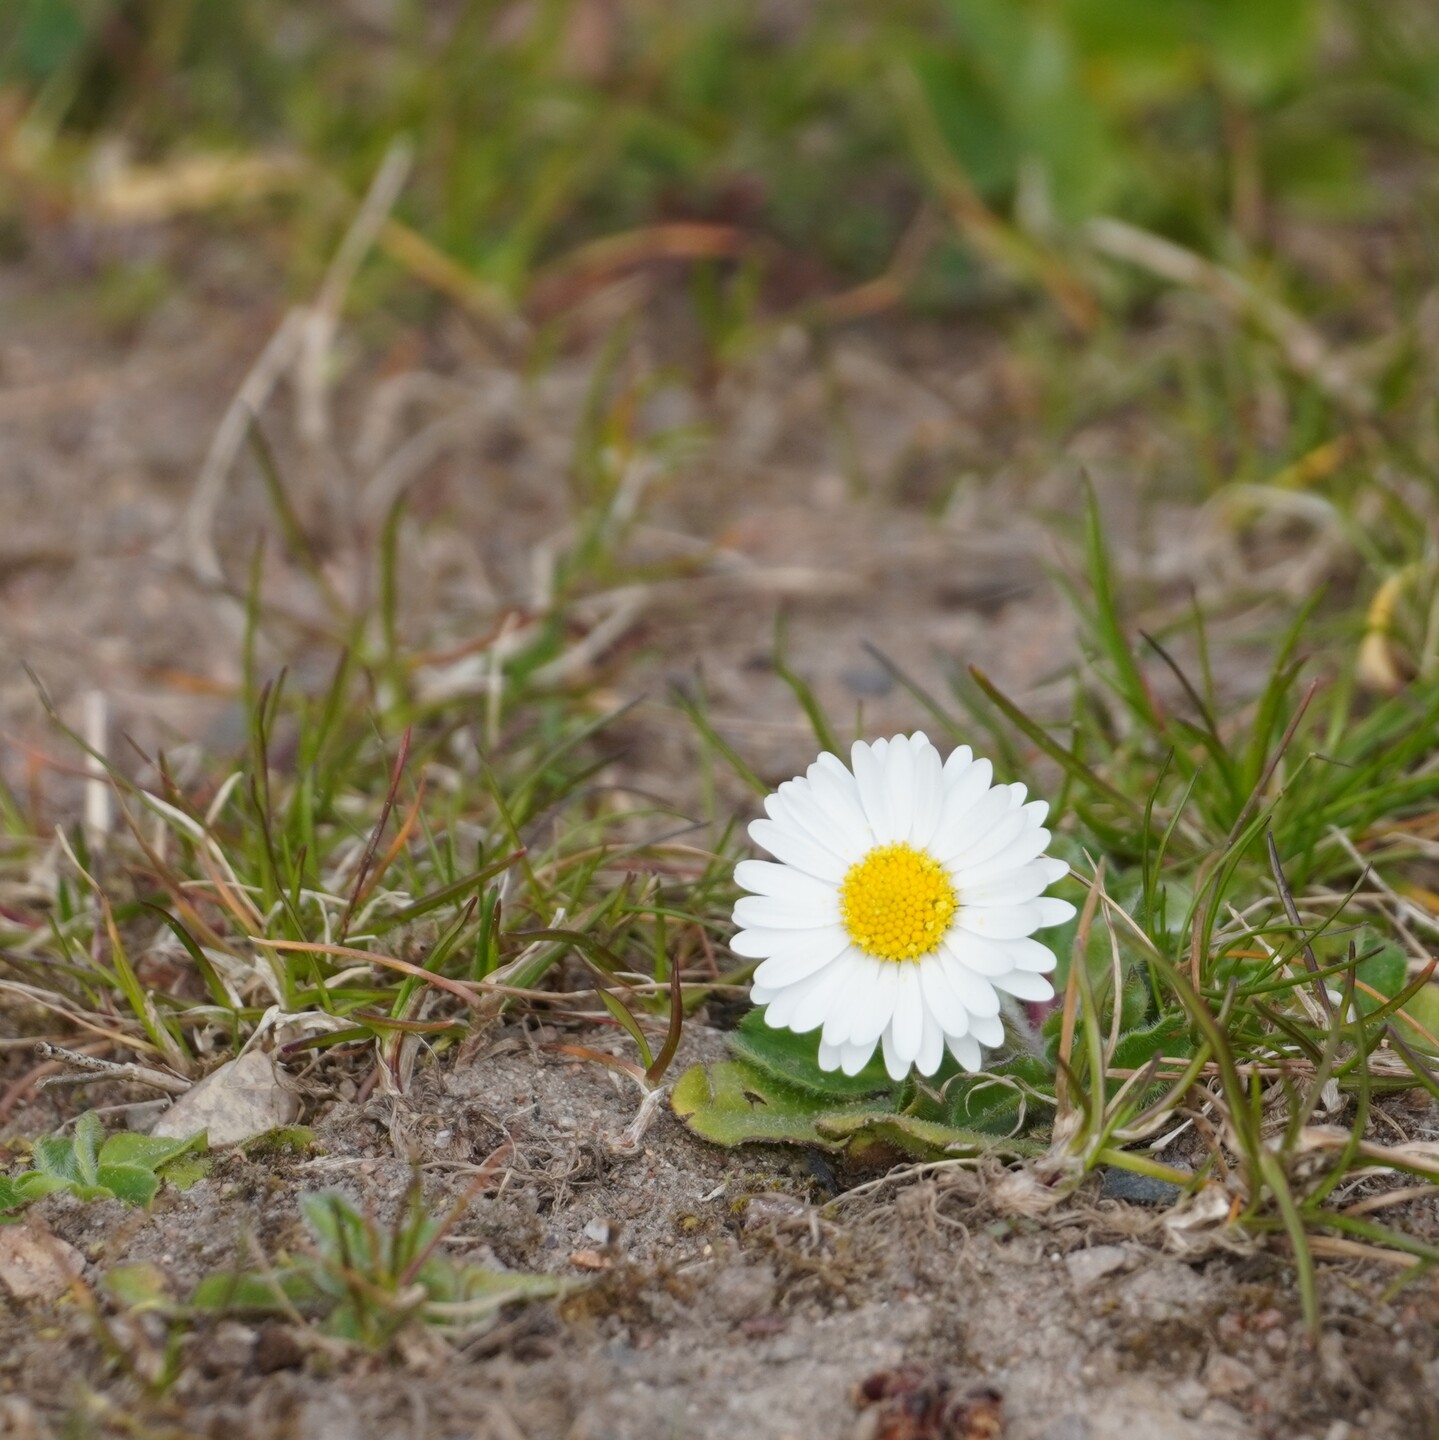 A small white flower with yellow middle, growing in dirt/grass.